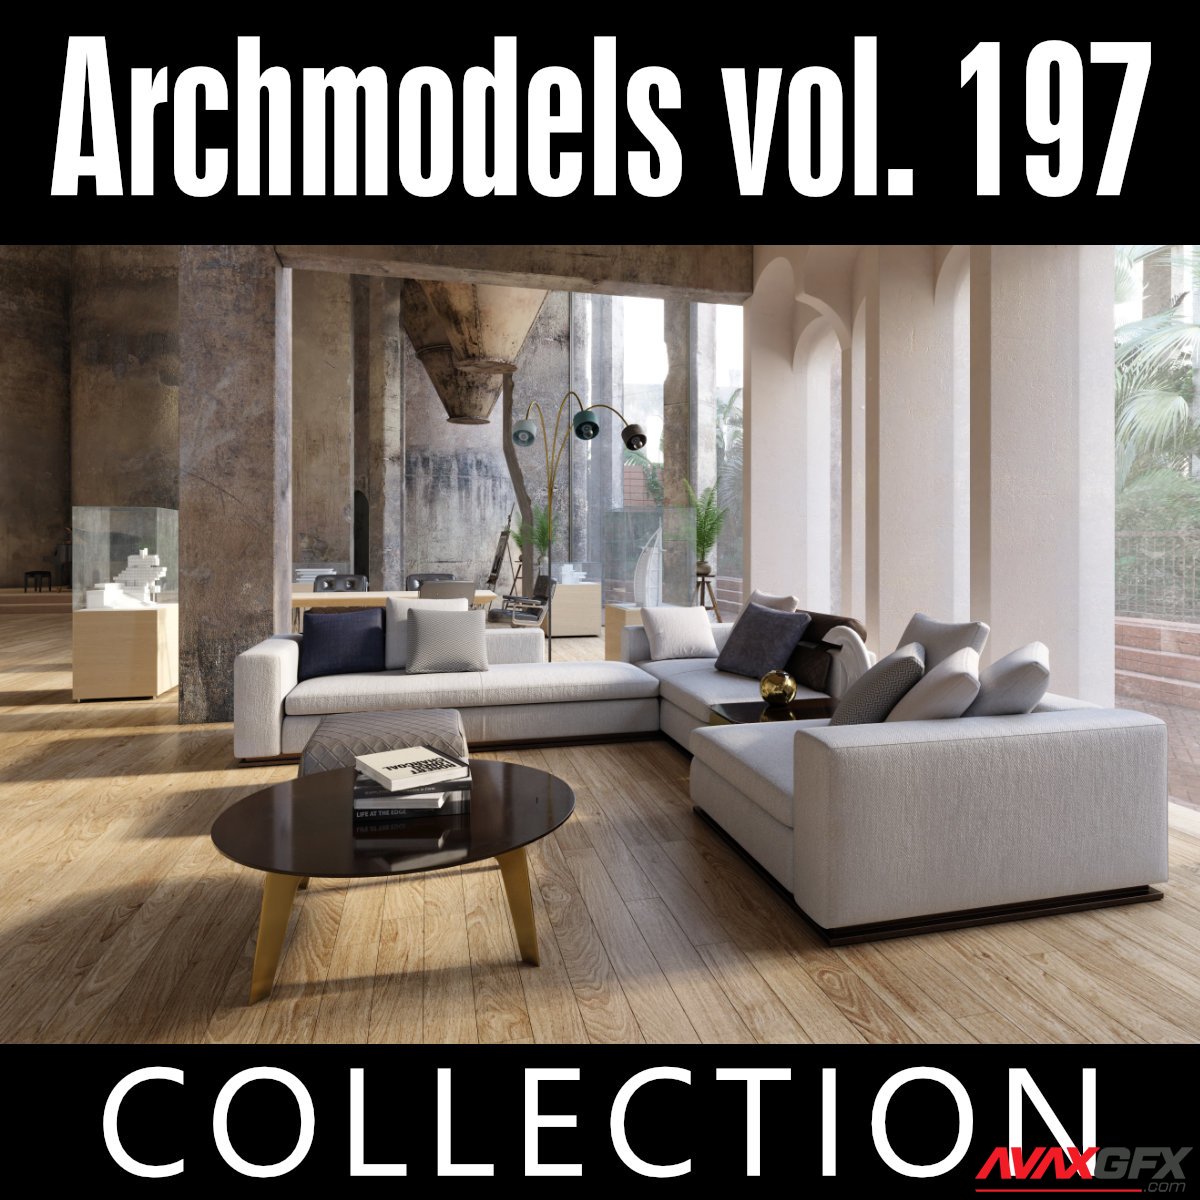 Evermotion Archmodels Vol. 197